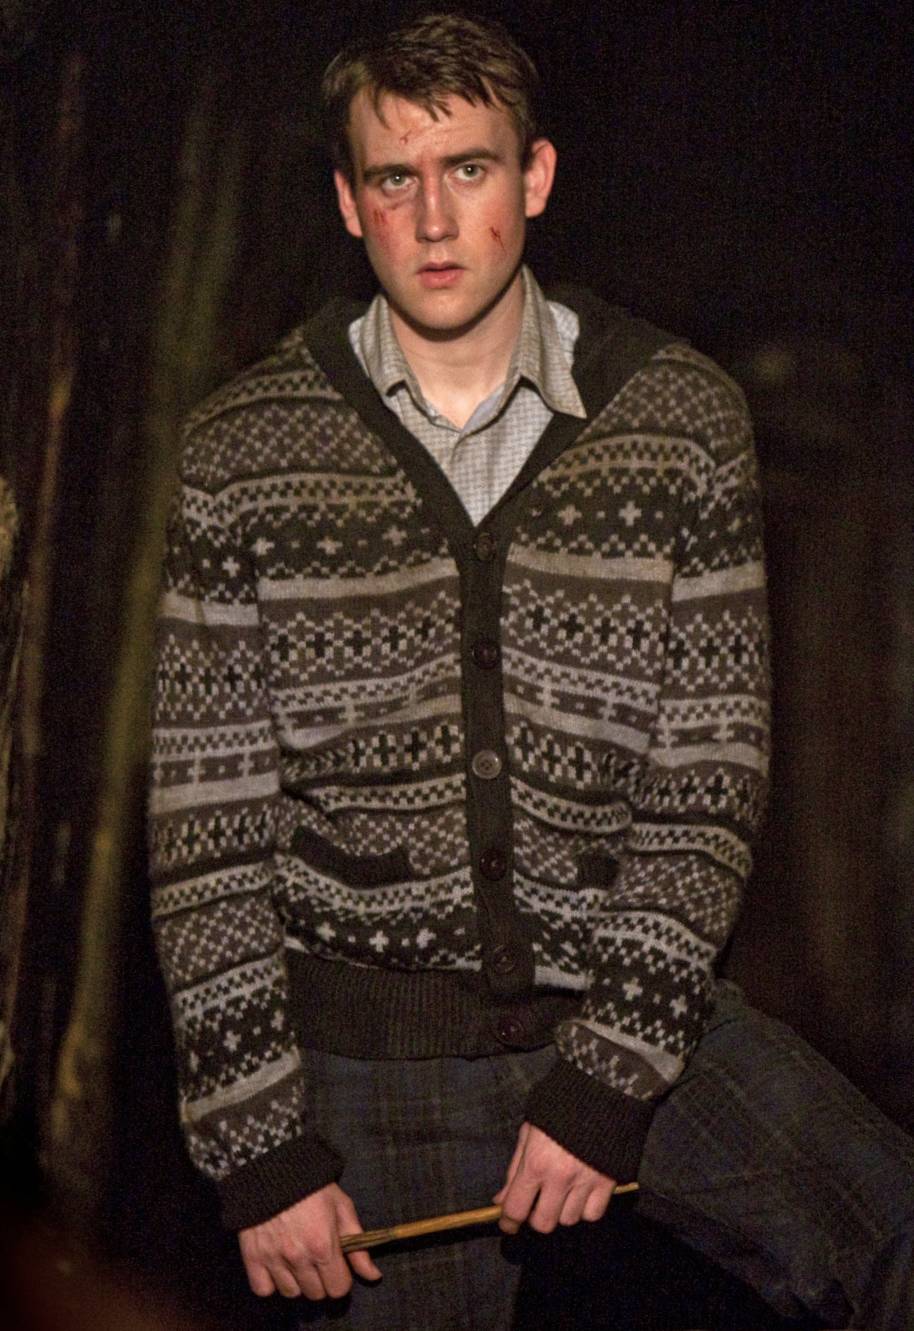 Neville at Hogwarts from the Deathly Hallows 